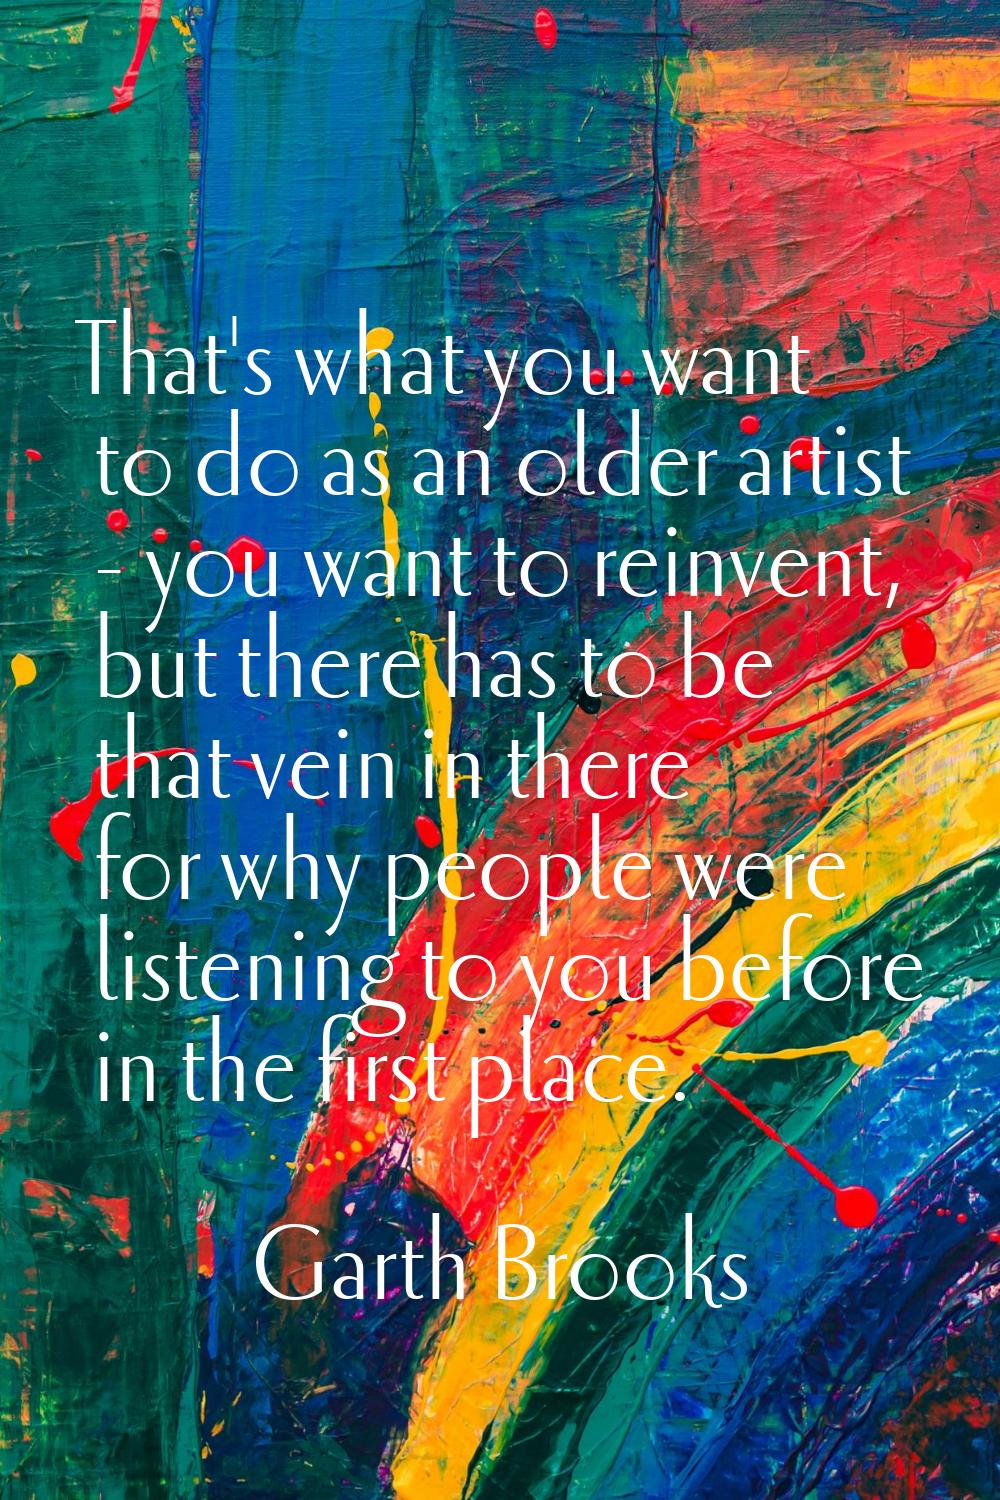 That's what you want to do as an older artist - you want to reinvent, but there has to be that vein